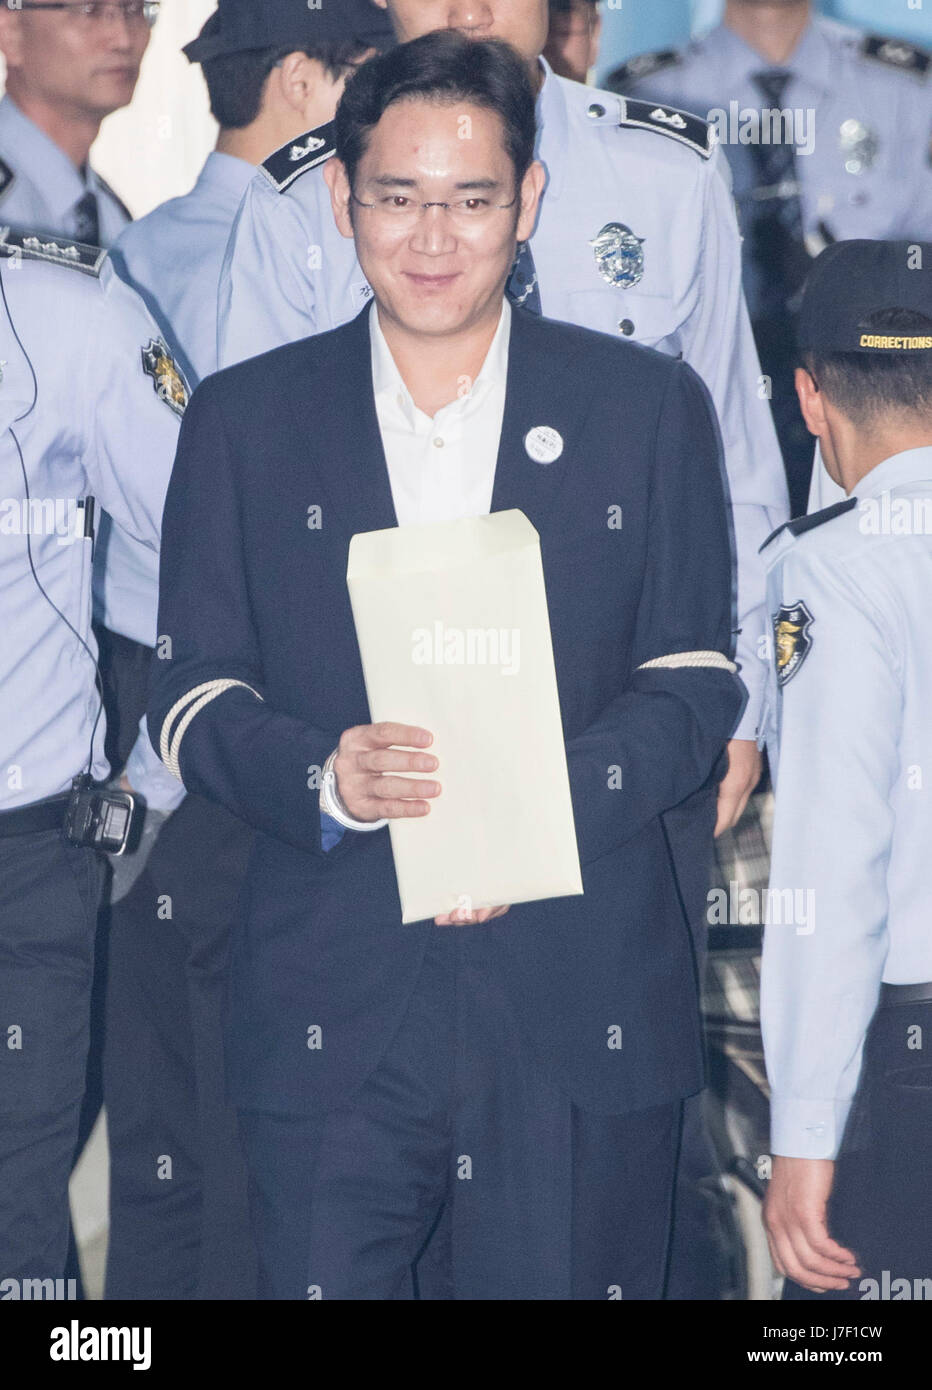 Seoul, Seoul Central District Court in Seoul. 25th May, 2017. Samsung Electronics Vice Chairman Lee Jae-yong, a de-facto leader of Samsung Group, arrives for a trial at the Seoul Central District Court in Seoul, South Korea on May 25, 2017. Credit: Lee Sang-ho/Xinhua/Alamy Live News Stock Photo